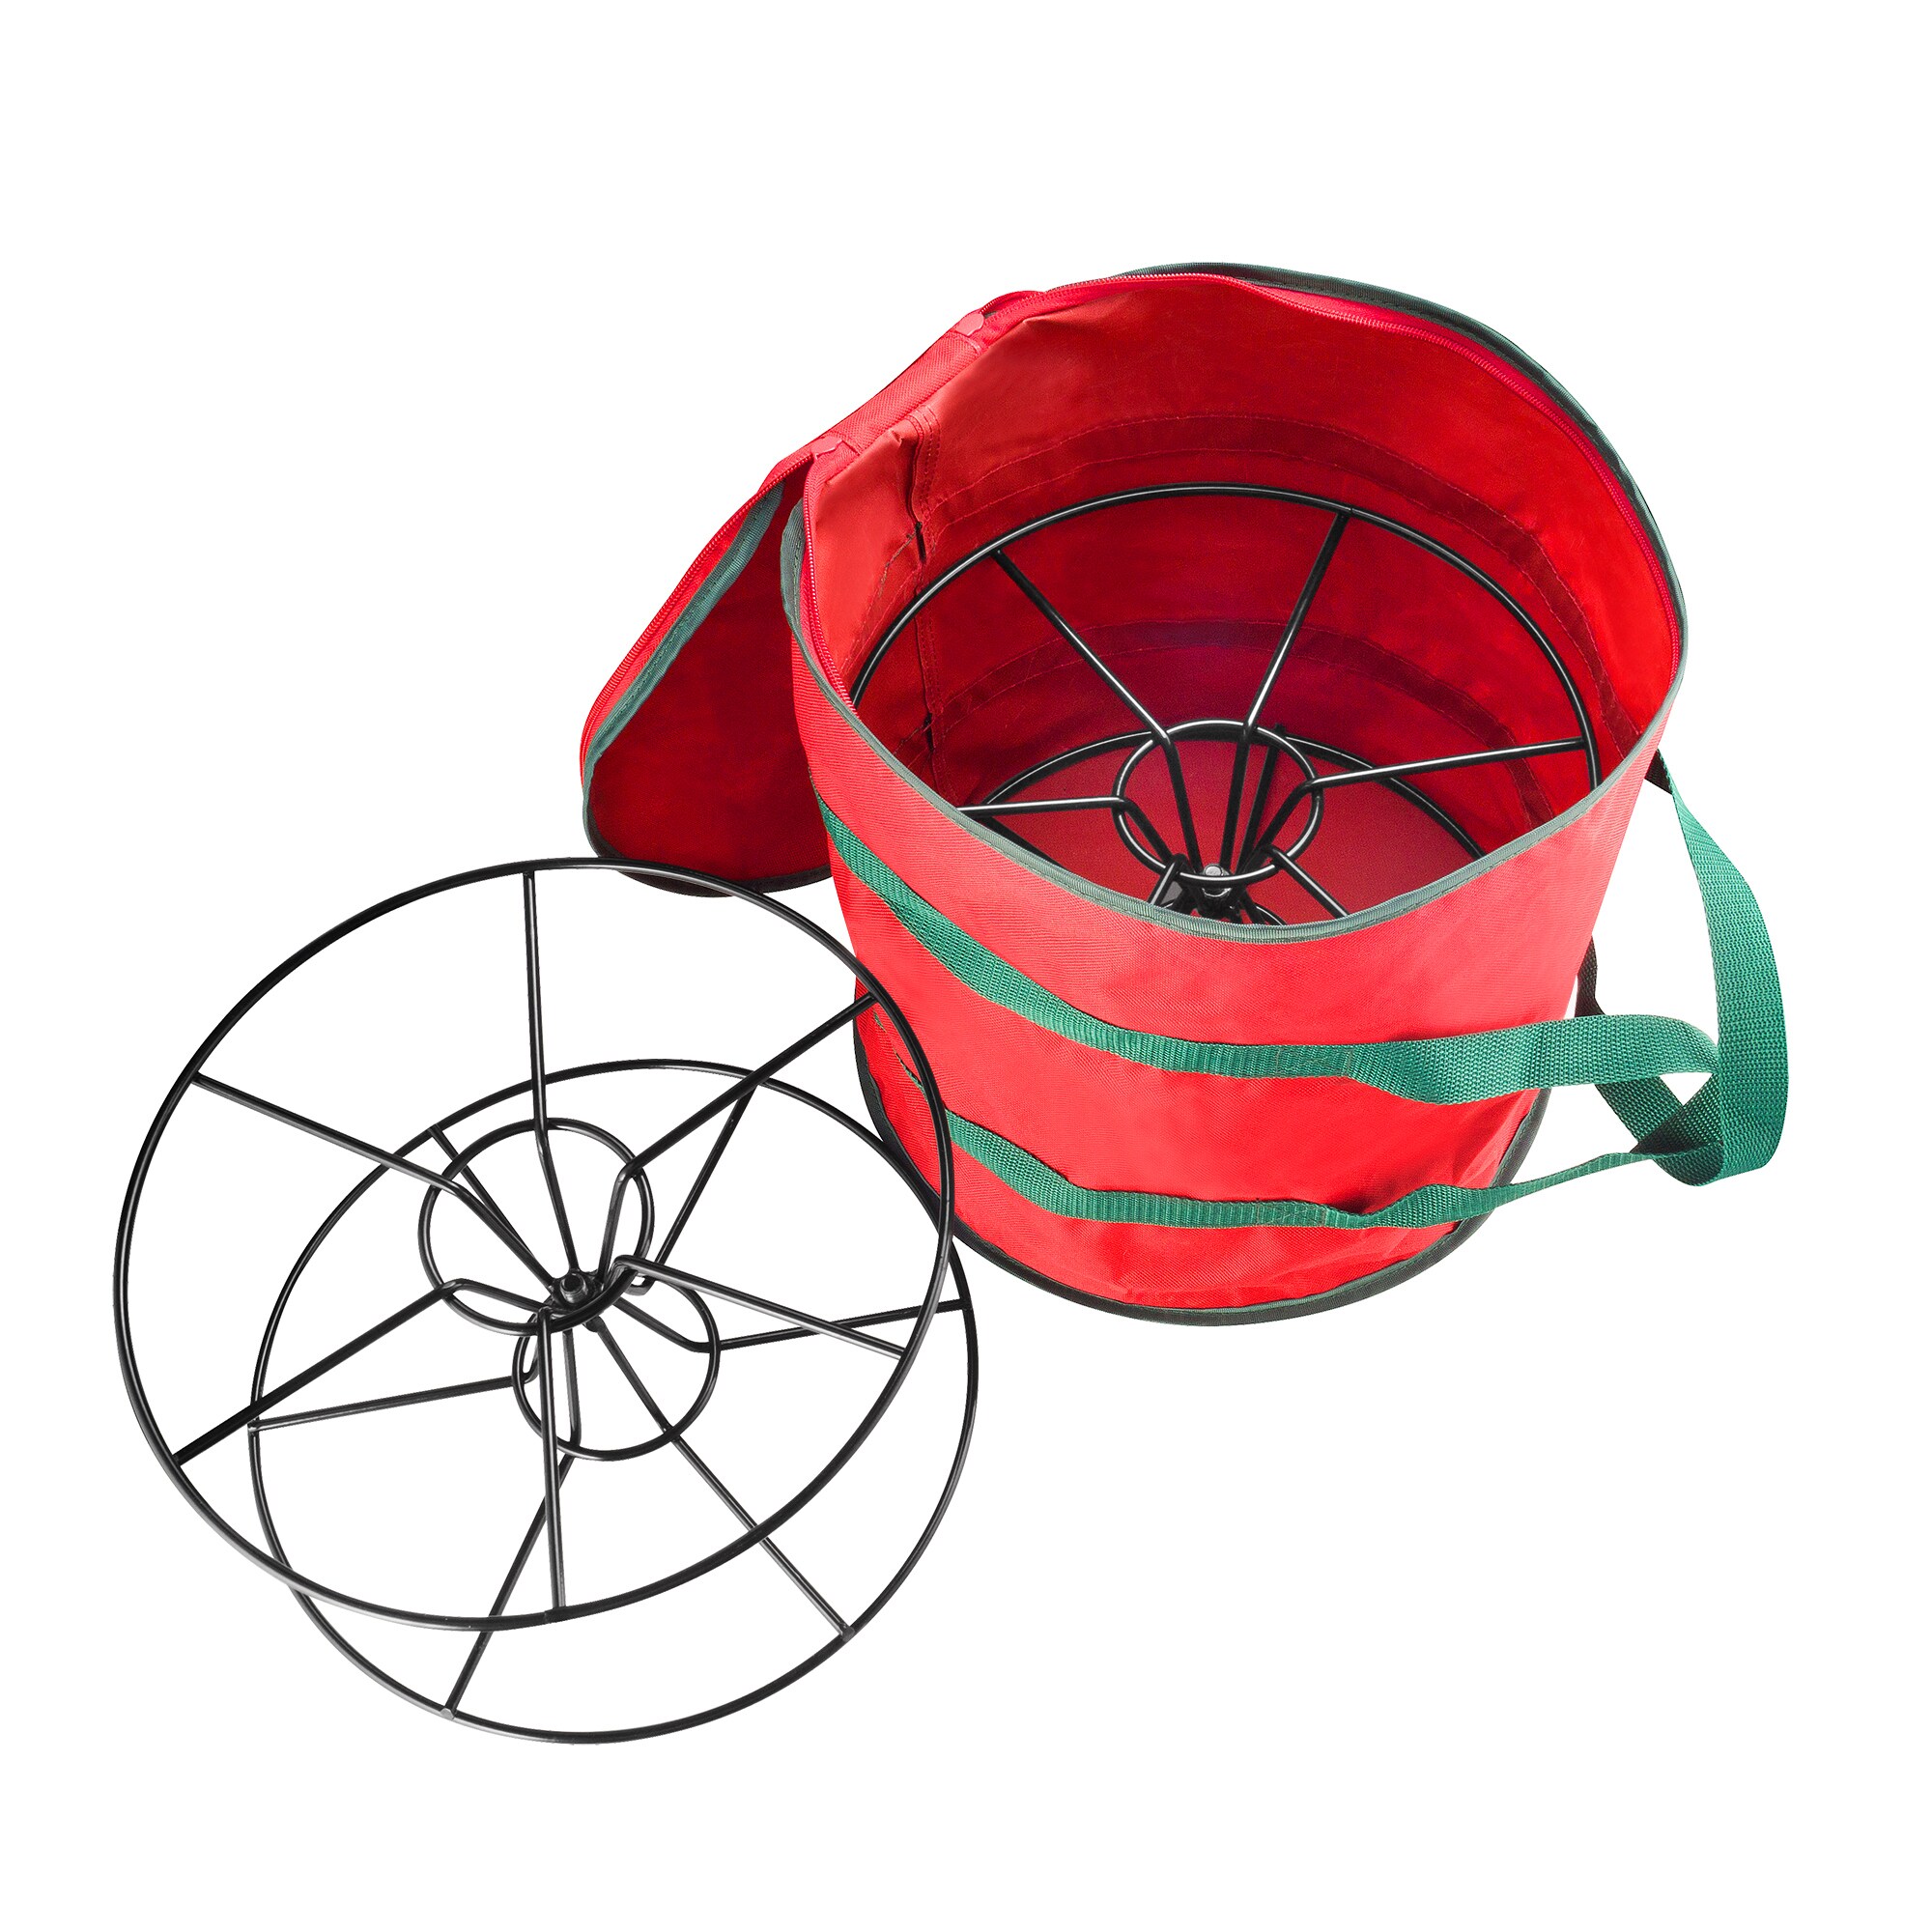 https://ak1.ostkcdn.com/images/products/11816725/Elf-Store-Red-Fabric-Metal-Premium-Christmas-Light-Storage-Bag-Steel-Reels-Holds-2x100-foot-Strands-7b9d0ee7-9c56-4a2e-a32c-94772642f4dc.jpg